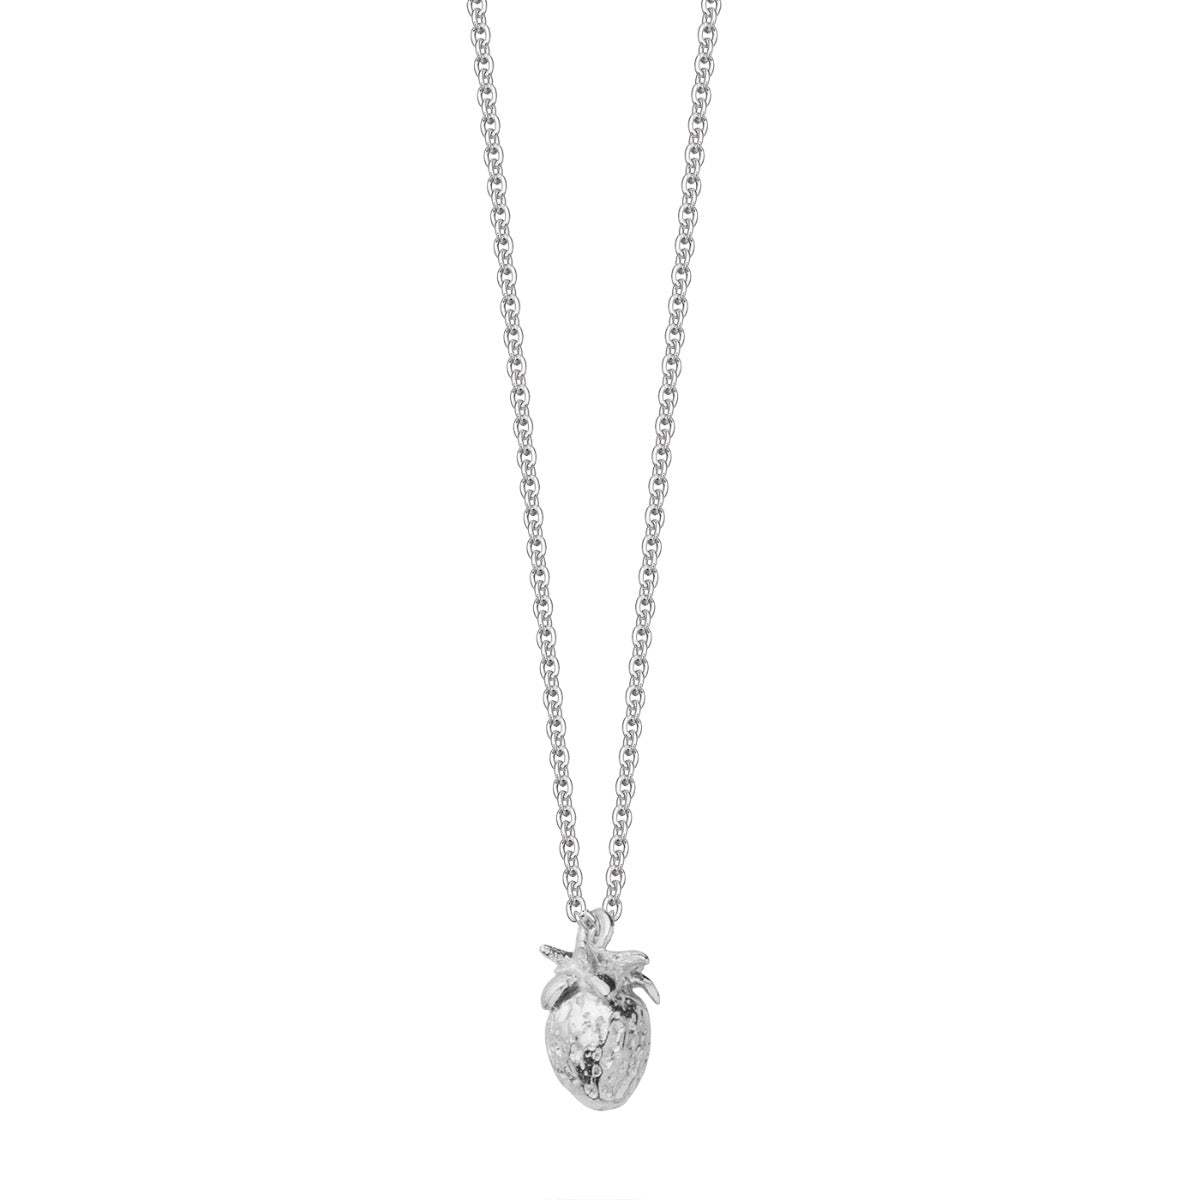 Sterling Silver Strawberry Pendant Necklace| Hersey & Son Silversmiths